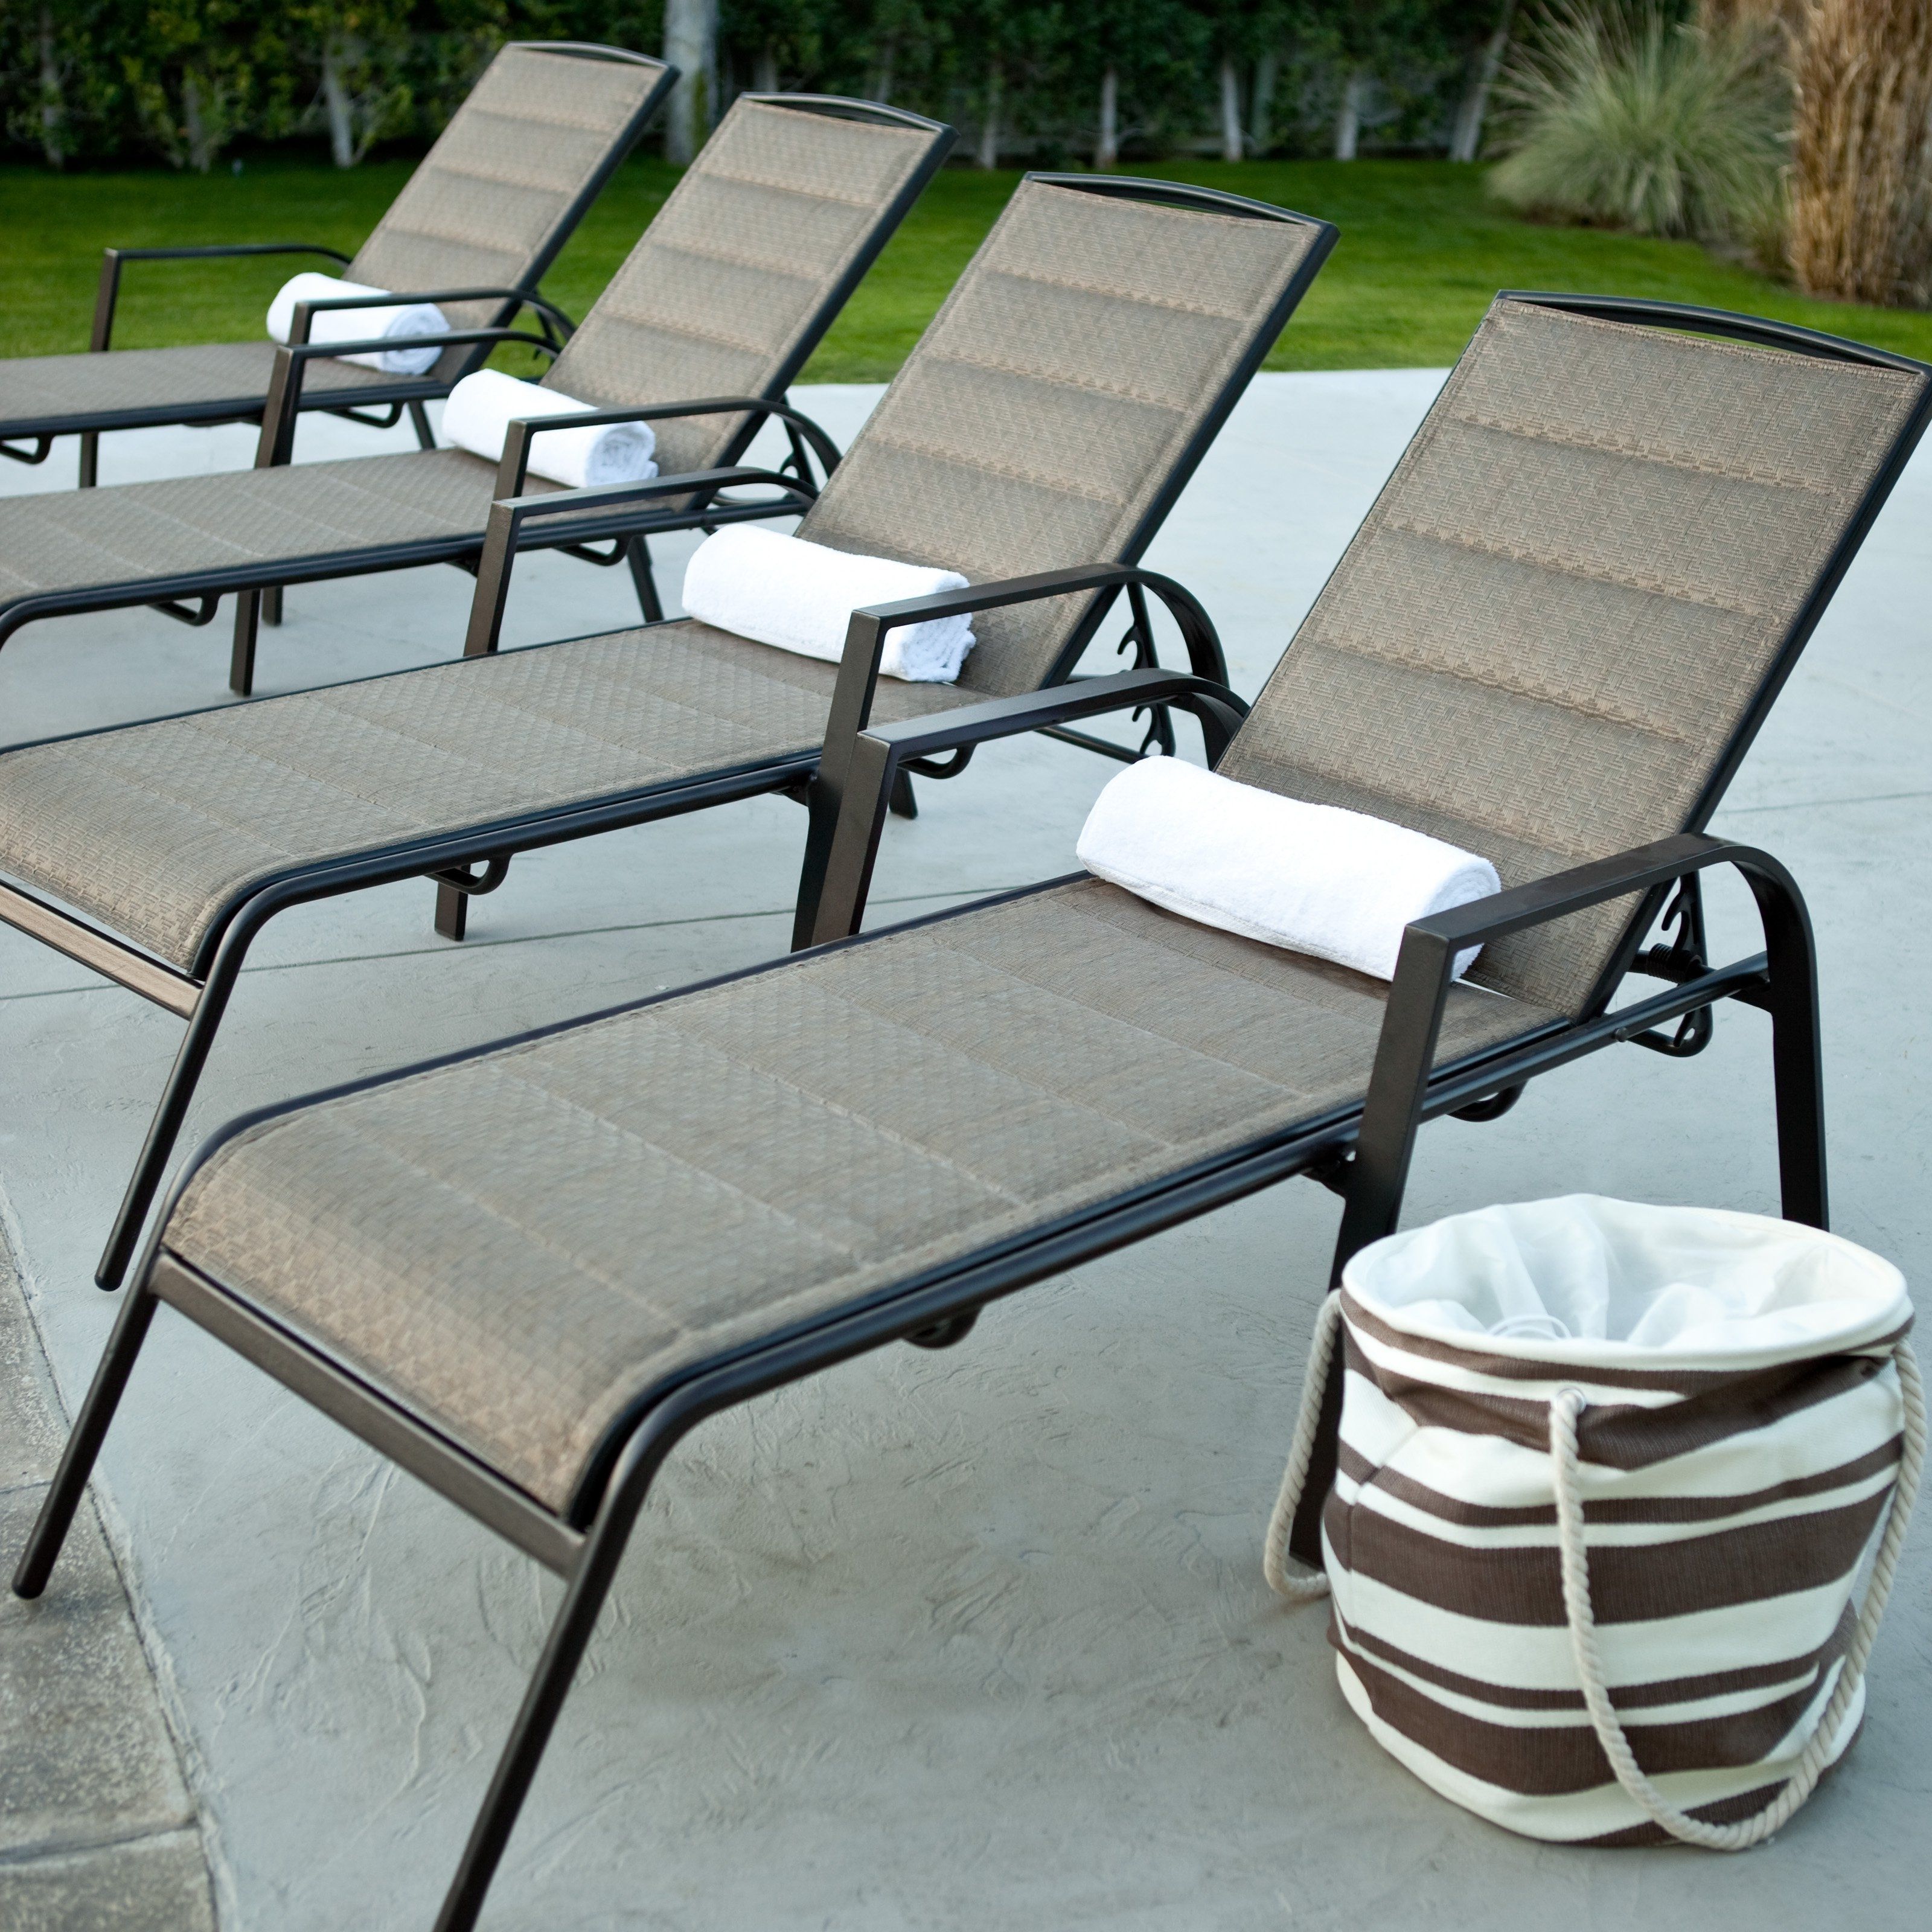 Chaise Lounge Lawn Chairs Inside Newest Chaise Lounge Chairs Pool Furniture • Lounge Chairs Ideas (View 14 of 15)